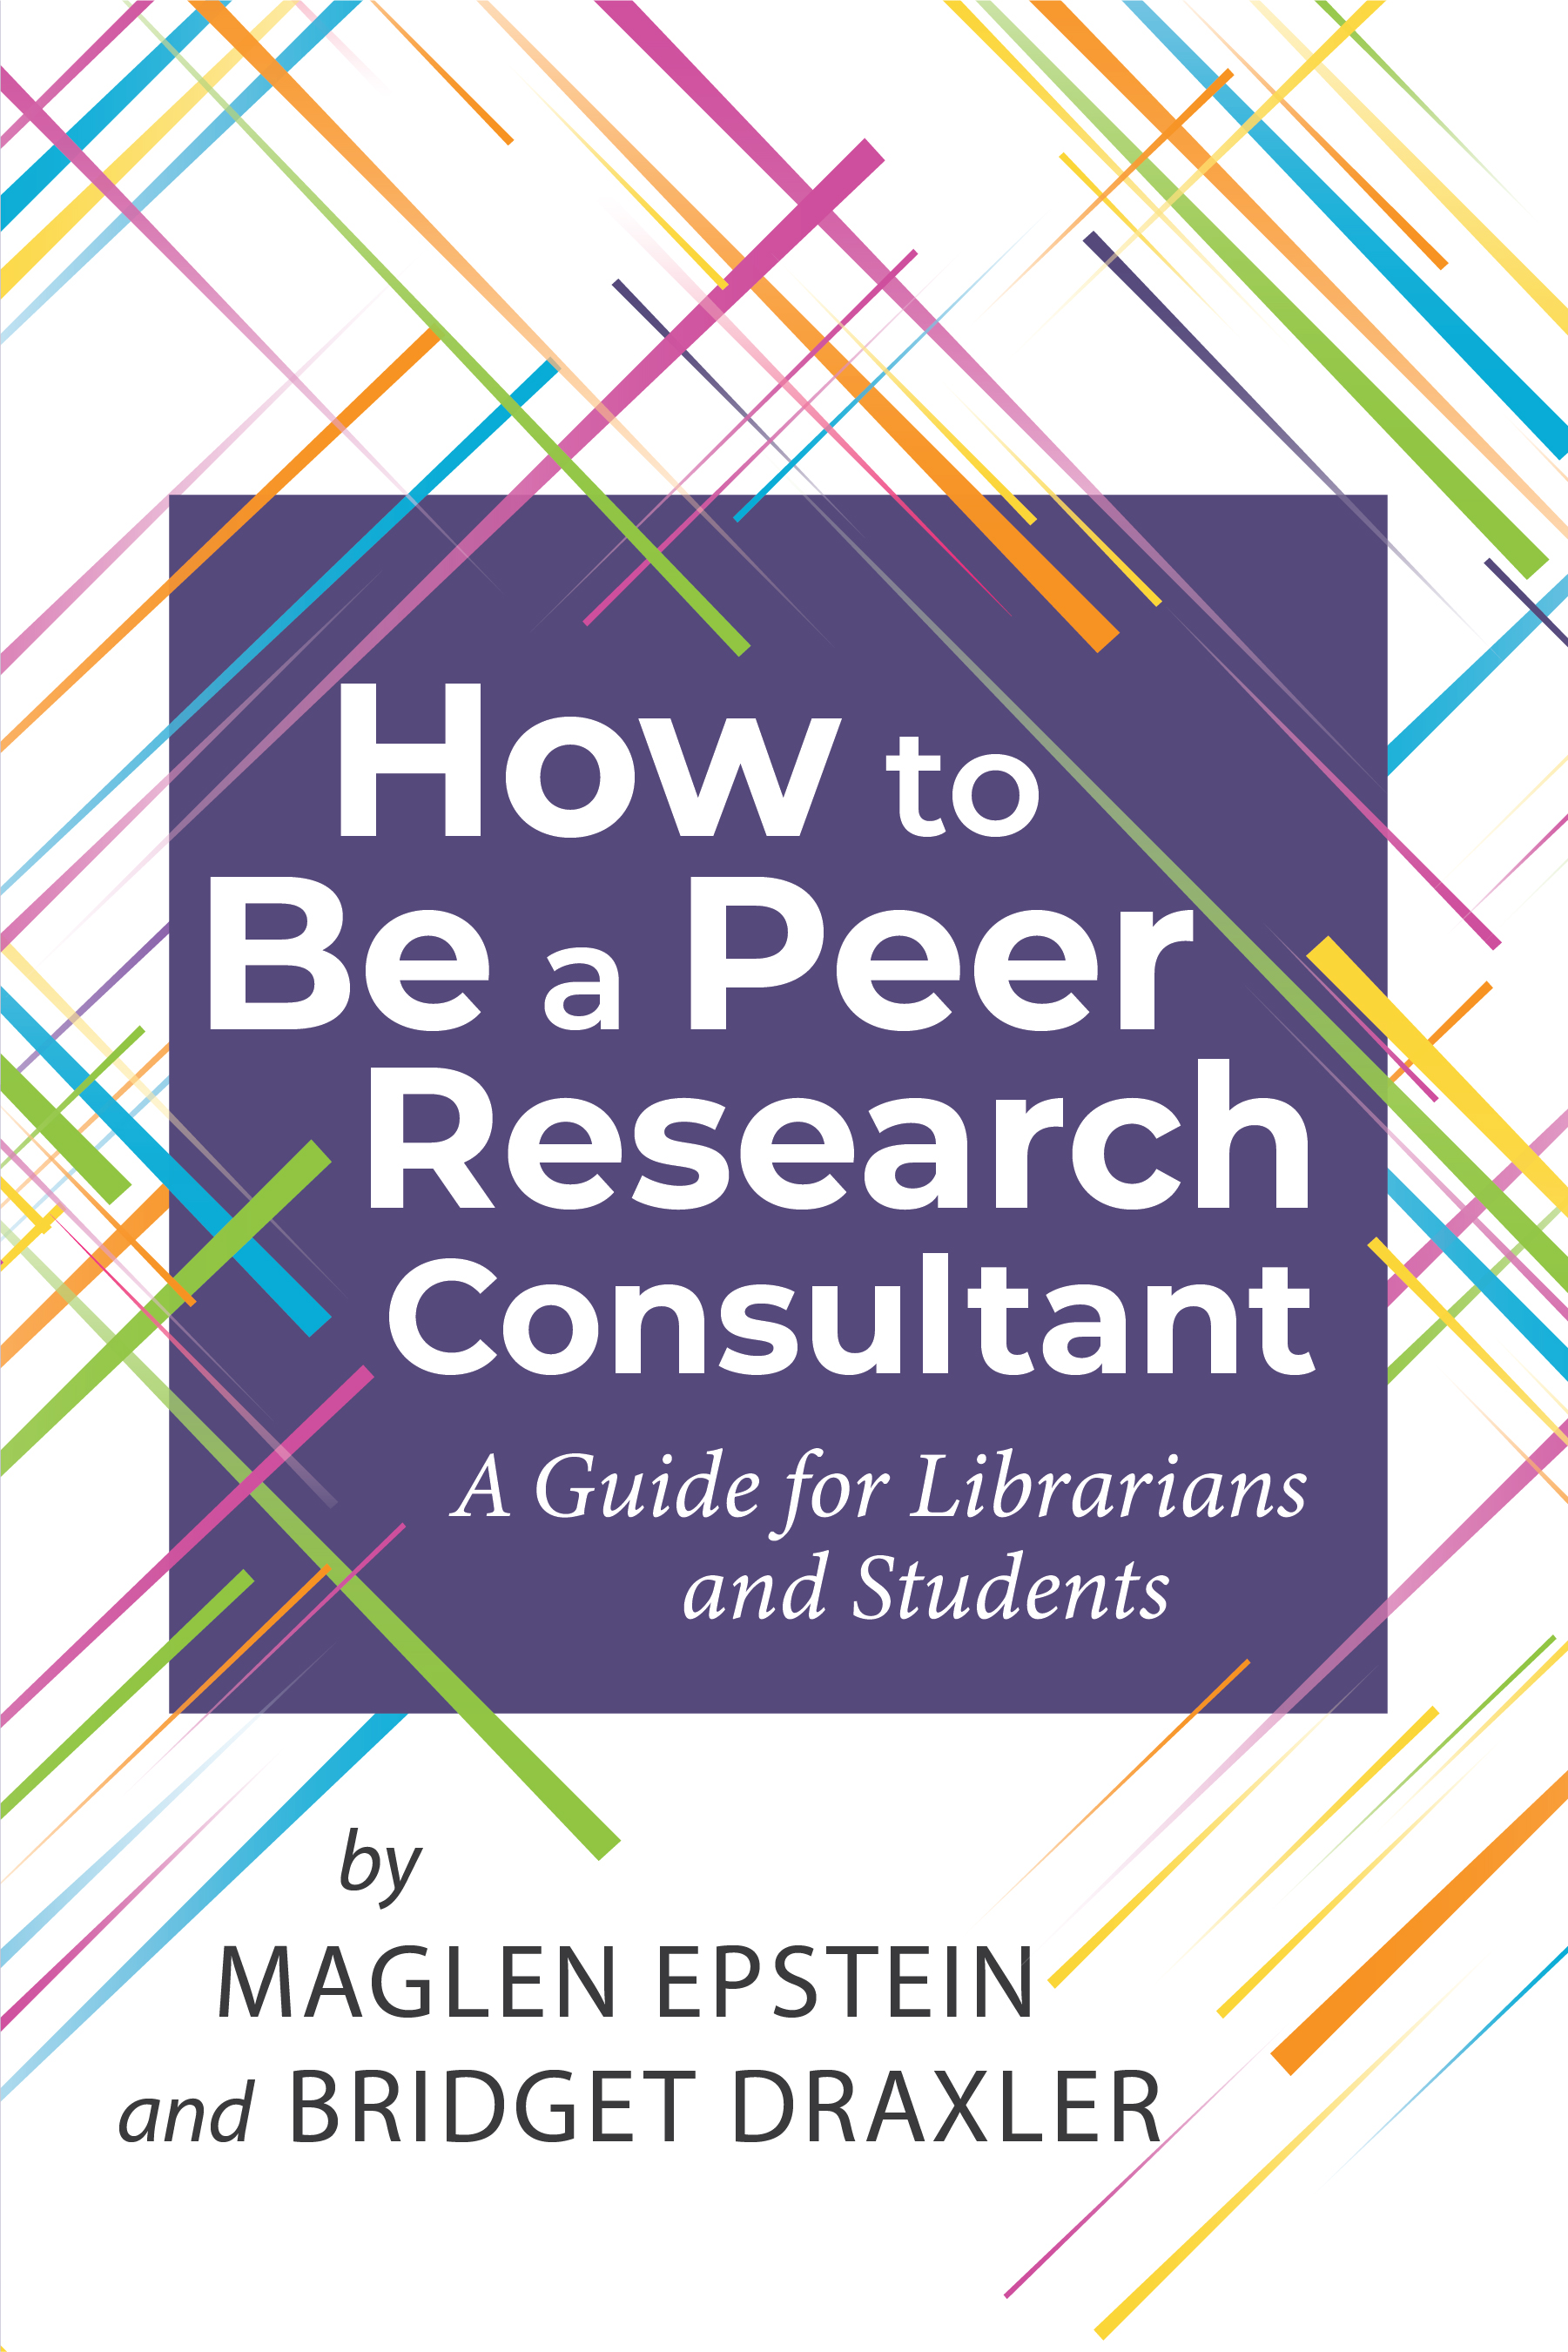 How to be a Peer Research Consultant